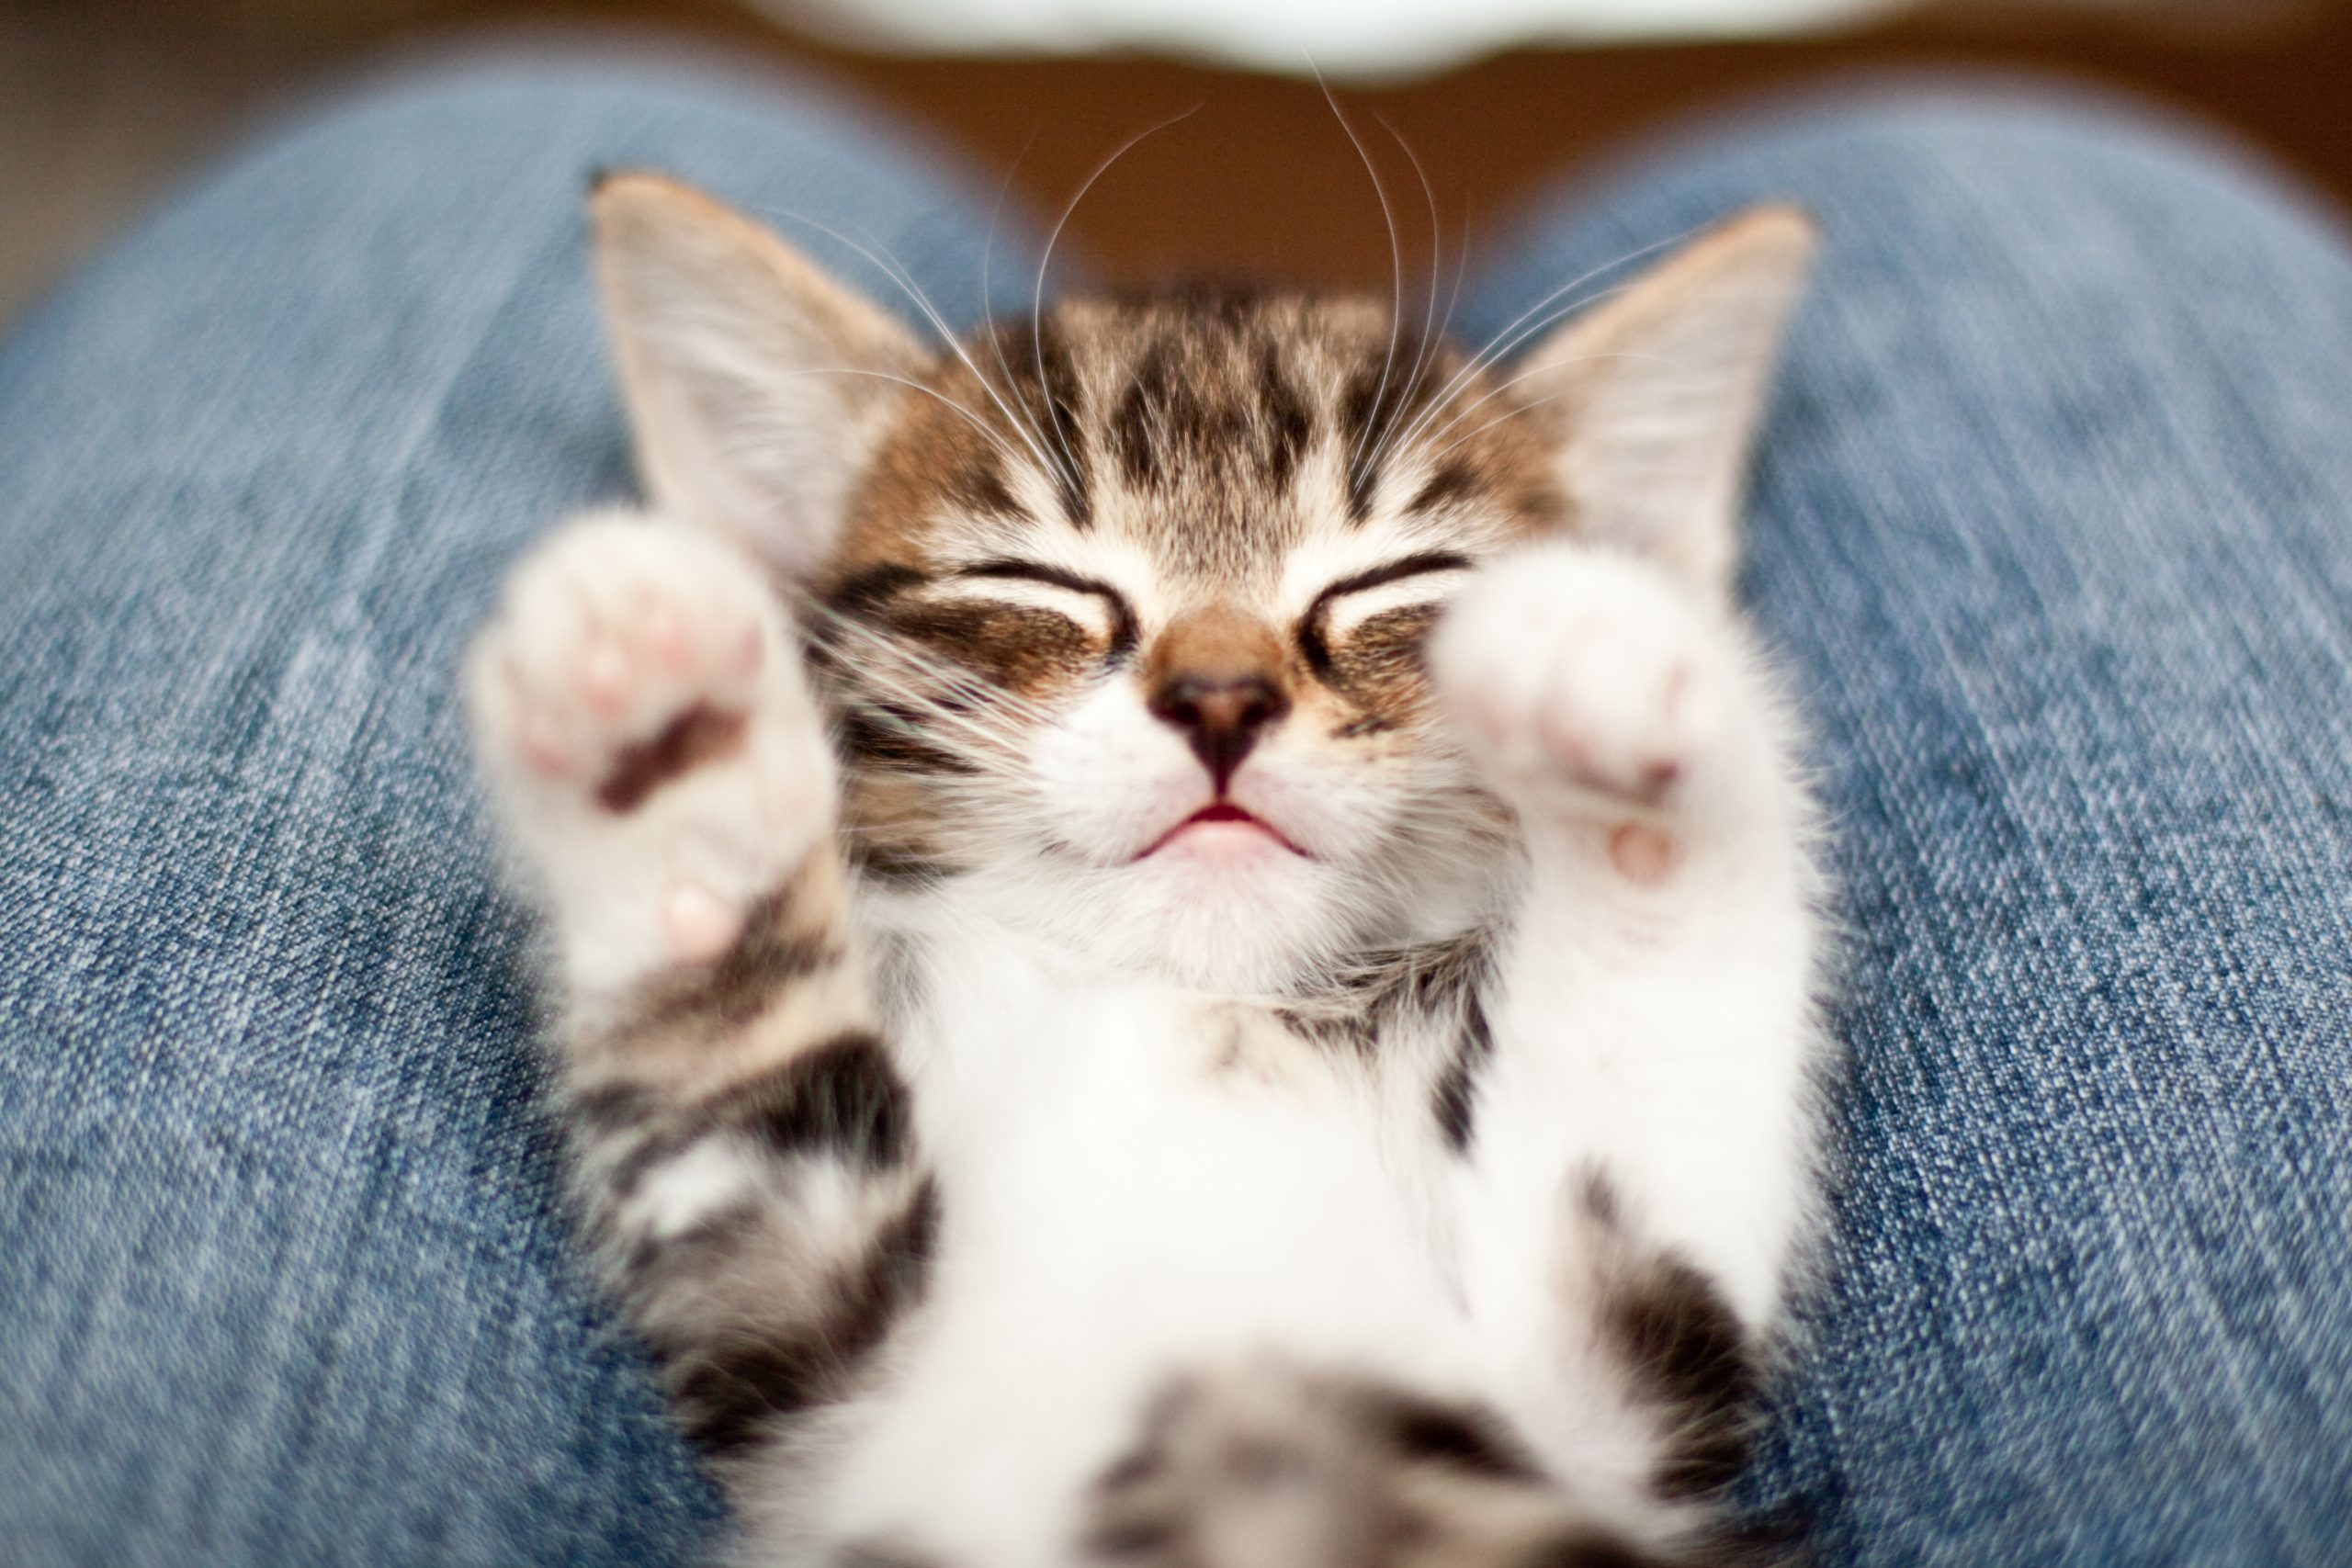 50 Cute Kittens You Need to See | The Cutest Kitten Photos Ever